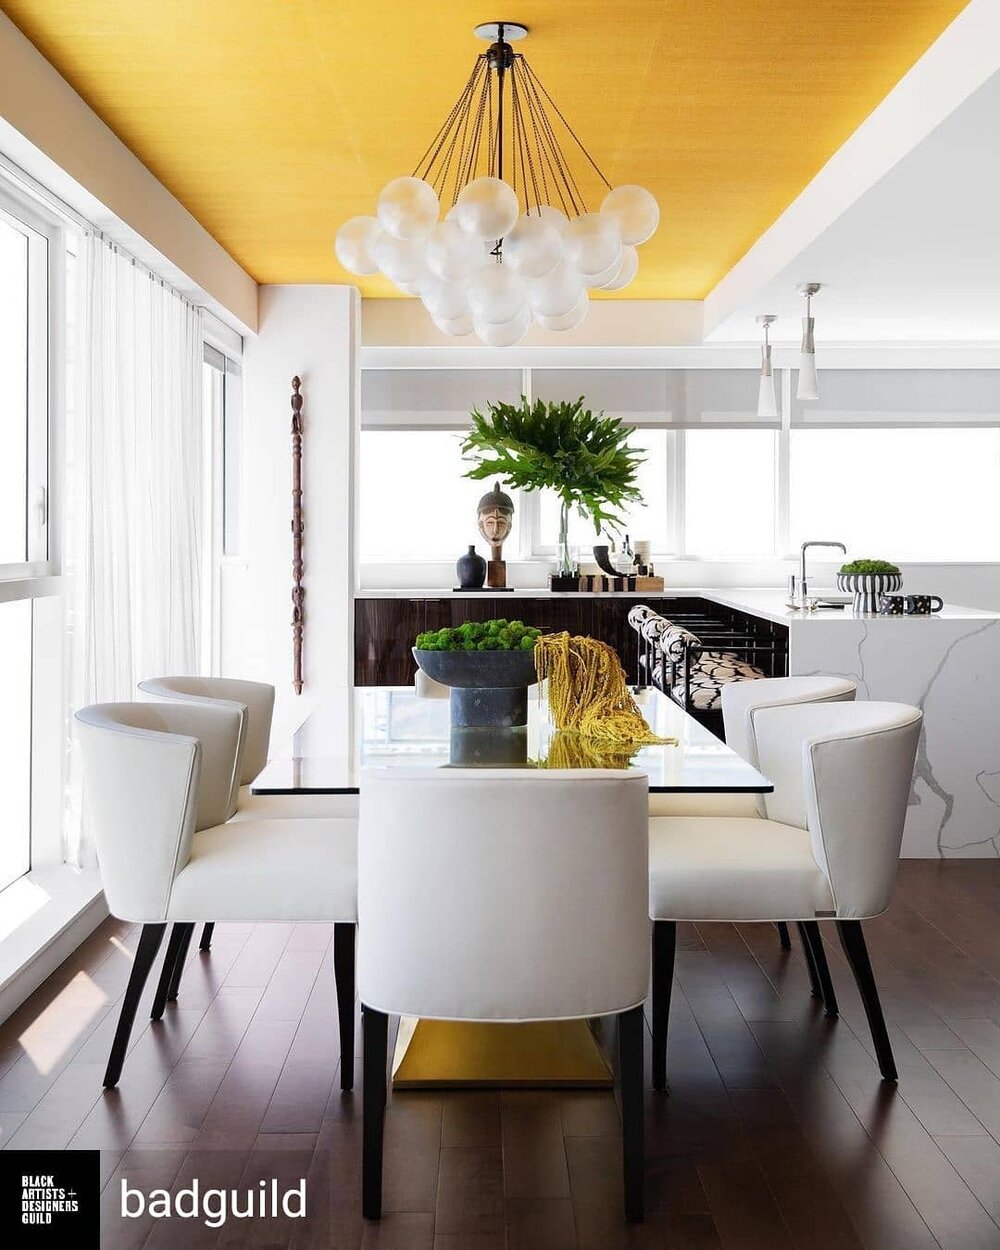 #repost @badguild:
Need a #designinspiration to brighten your day all day everyday? #BADGmaker @haldeninteriors brings the sunshine and good vibes in her latest interiors project. The space embodies happiness and warm memories for a special client who recently lost her husband. You can see the full spread in @housebeautiful magazine
📷 @brittanyambridge
.
What color would you add to your ceiling?
.
#womenshistorymonth #empoweredwomen #womensupportingwomen #empoweringwomen #womeninbusiness #womenempowermen #BlackInteriorDesigners #BlackDesigners #celebratewomen #contemporarydesign #blackcreativity